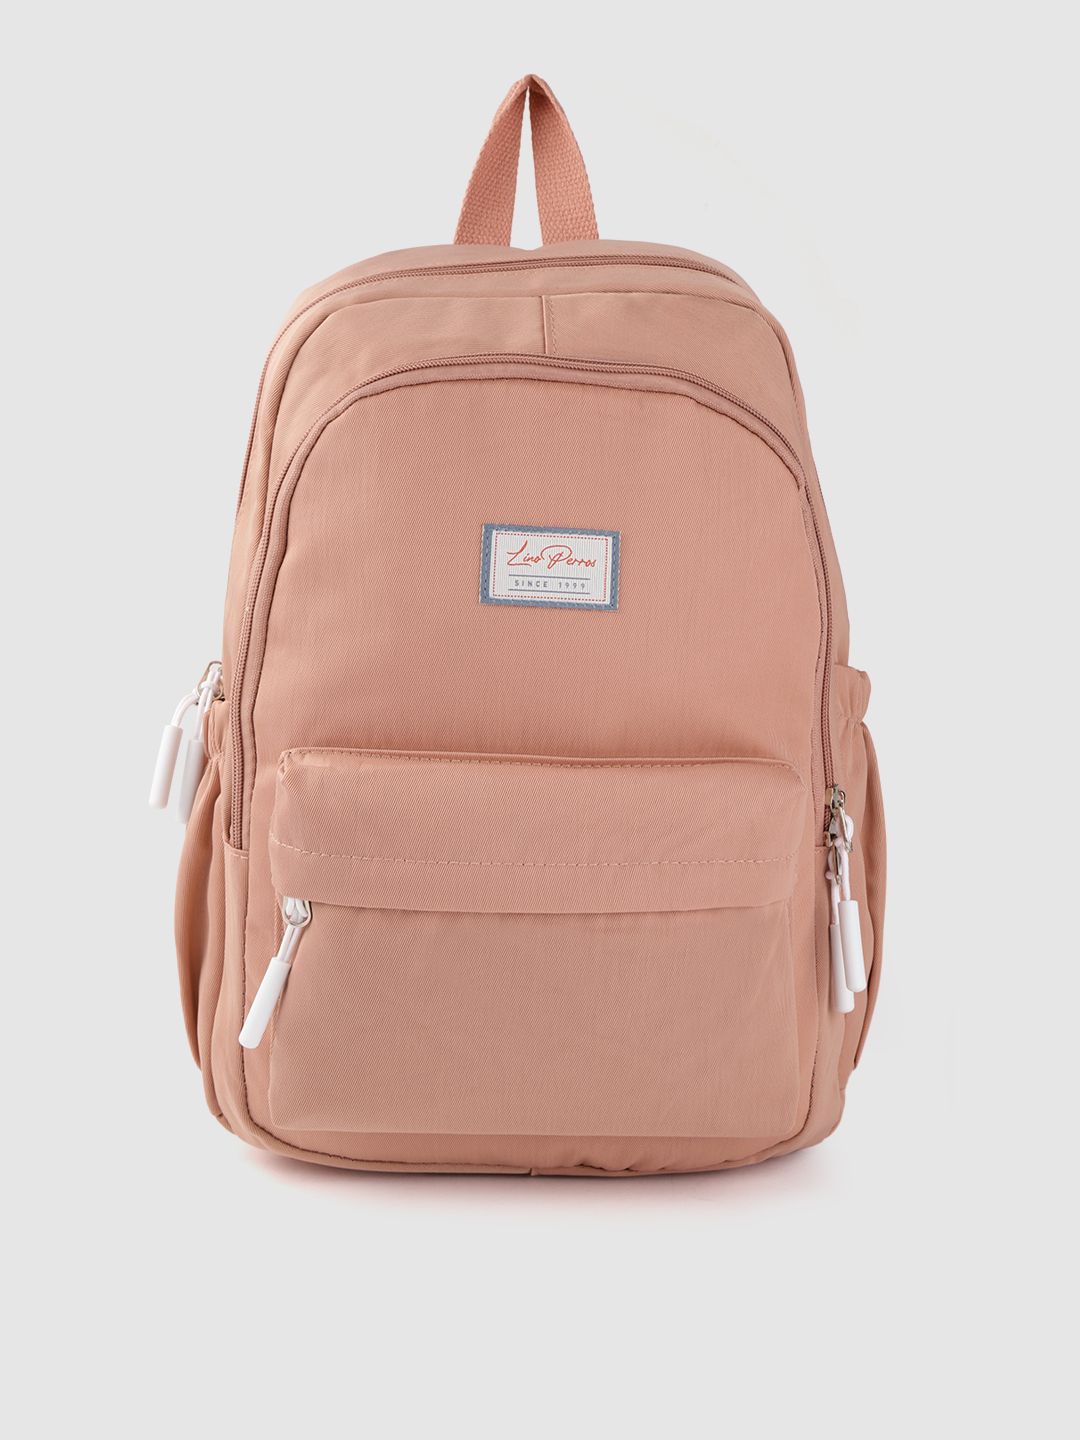 Lino Perros Women Pink Solid Laptop Backpack Price in India